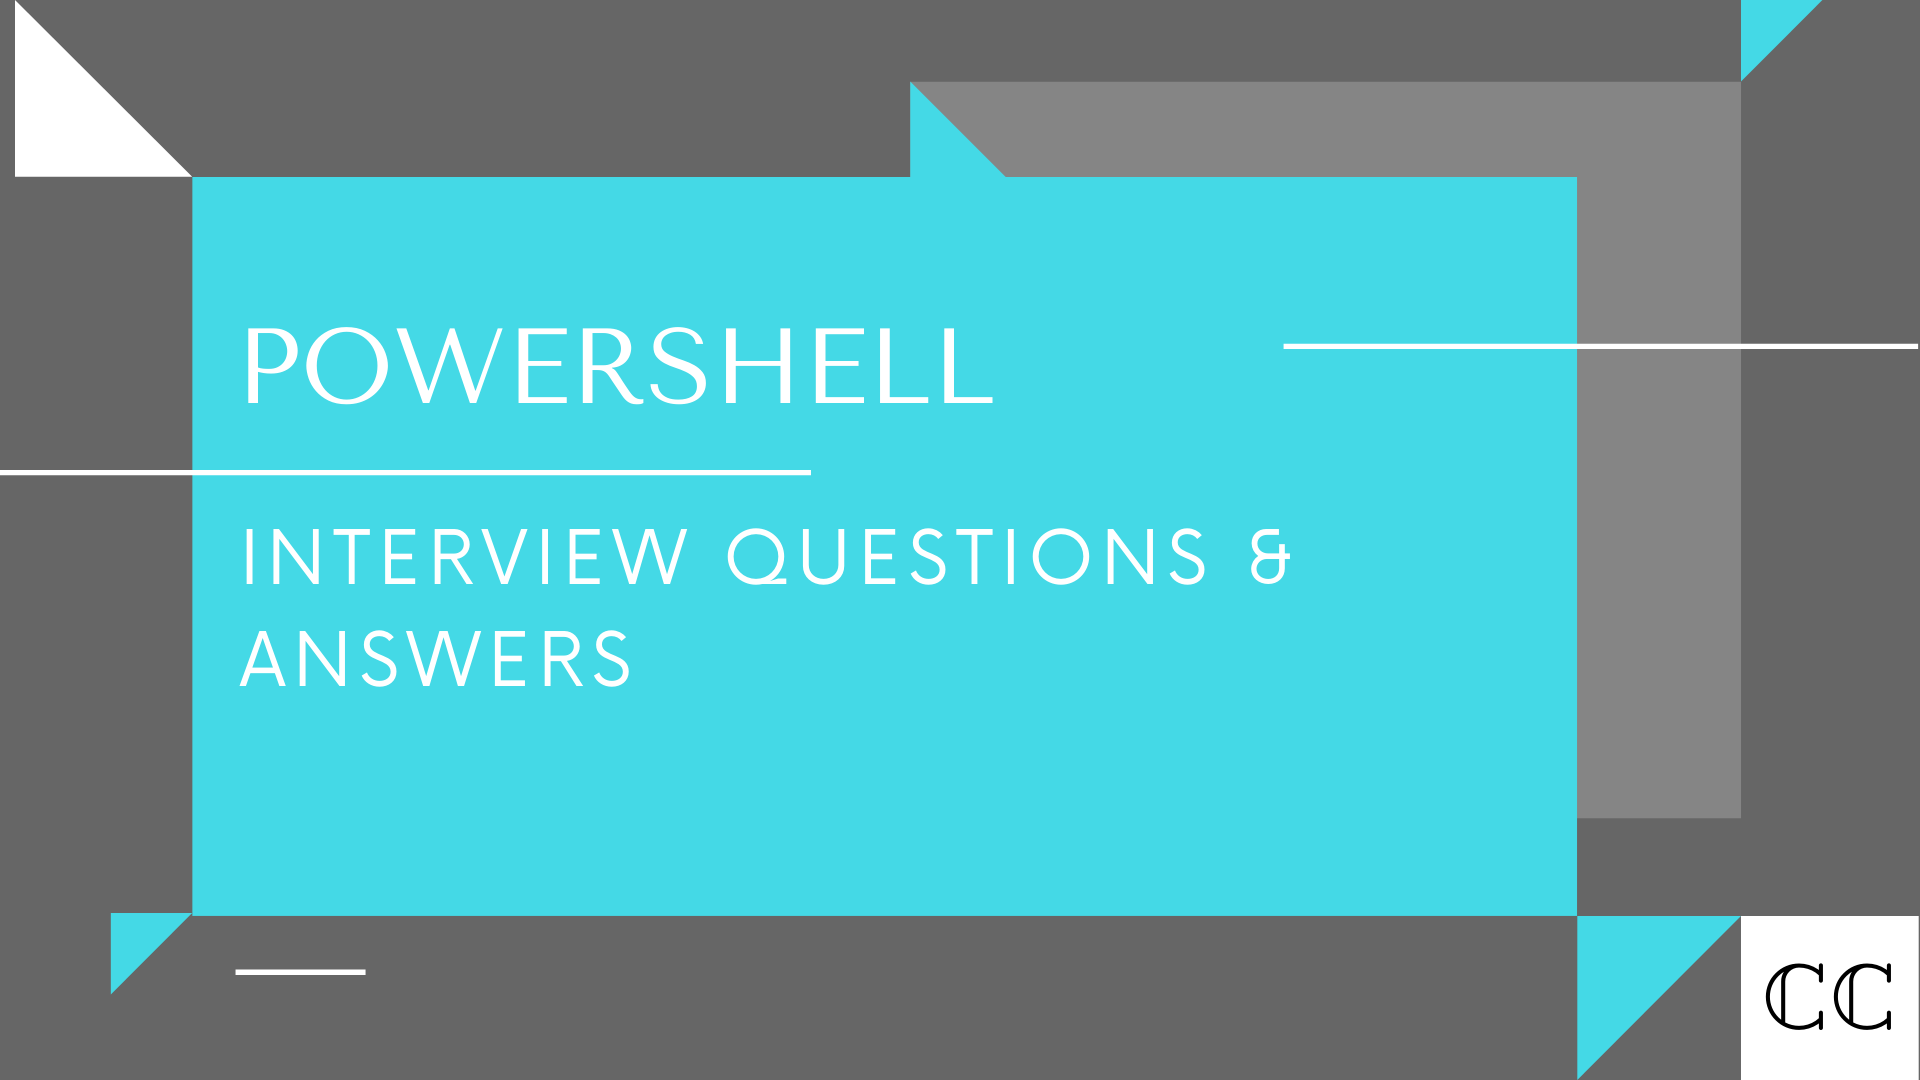 Powershell Interview Questions